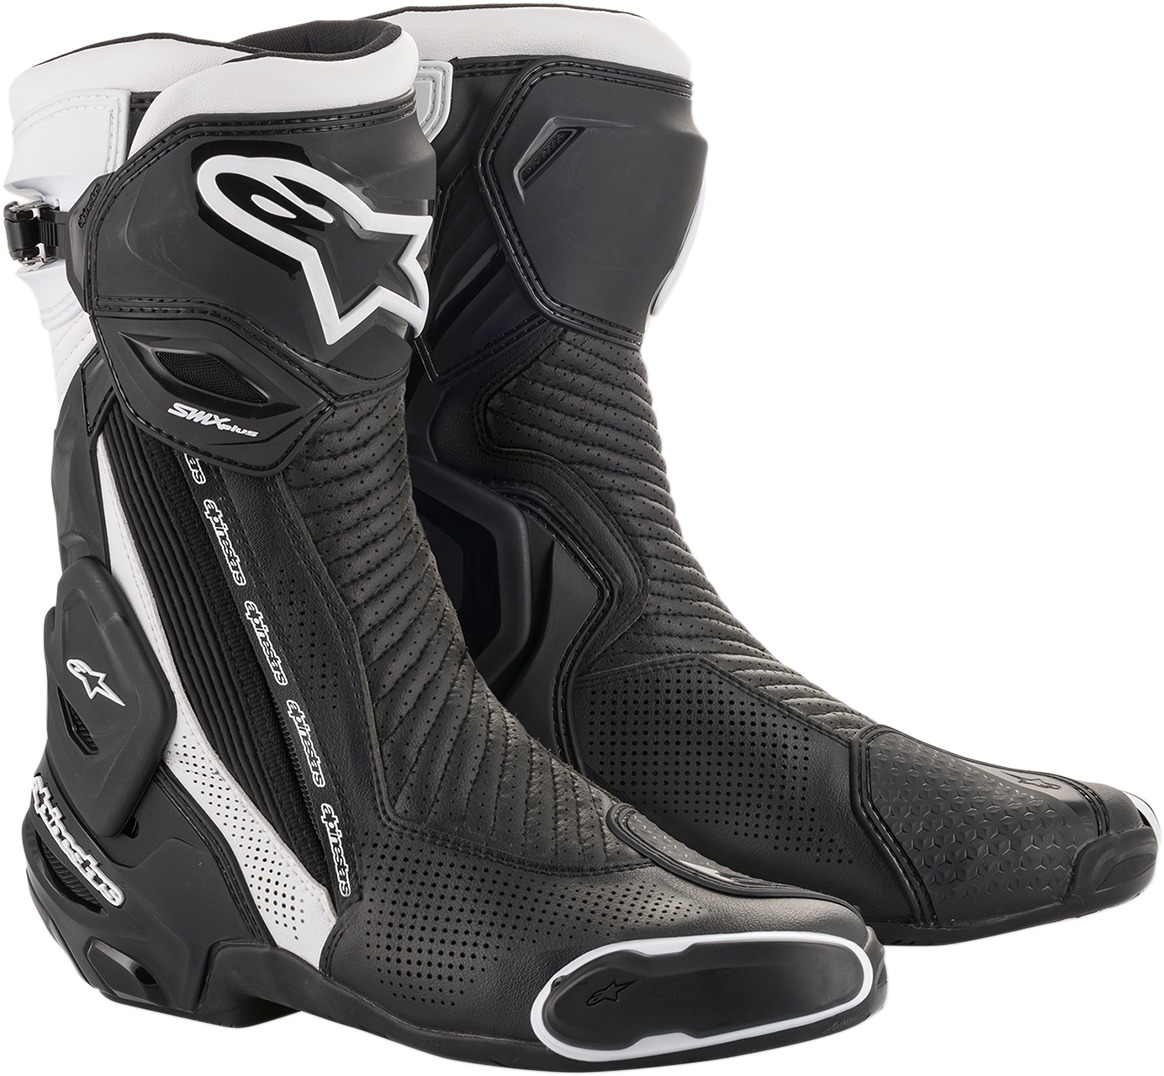 SMX Plus Street Riding Boots Black/White US 9.5 - Click Image to Close